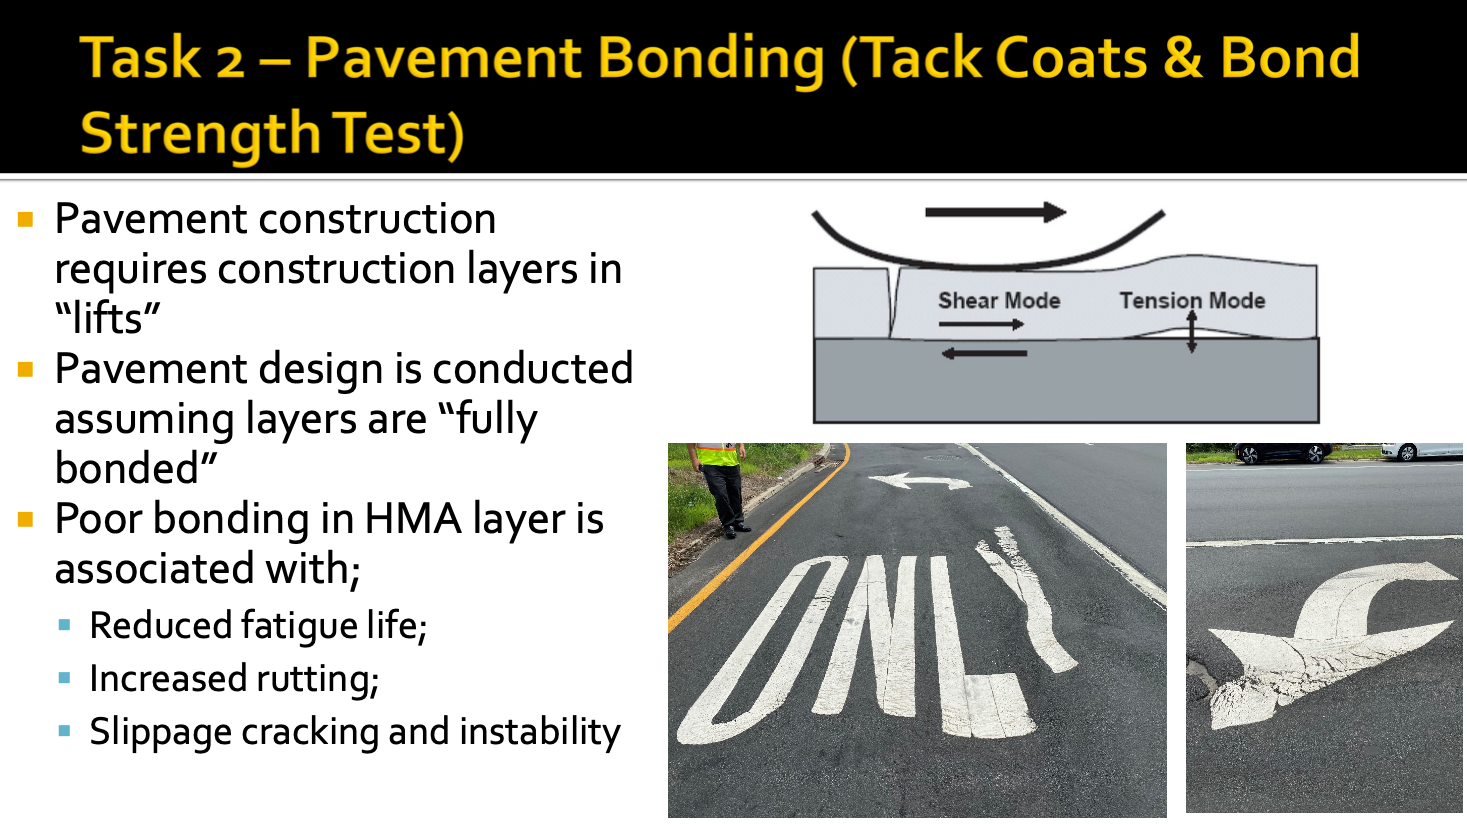 Slide reads Task 2 - Pavement Bonding (Tack Coats & Bond Strength Test), with immages of defromed pavement. A graphic shows how tension between two layers of pavement that are not properly bonded creates space for friction. Bullet points read: Pavement construction requires construction layers in "lifts." Pavement design is conducted assuming layers are "fully bonded," Poor bonding in HMA layer is associated with, reduced fatigue life, increased drutting, and slippage, cracking, and instability.